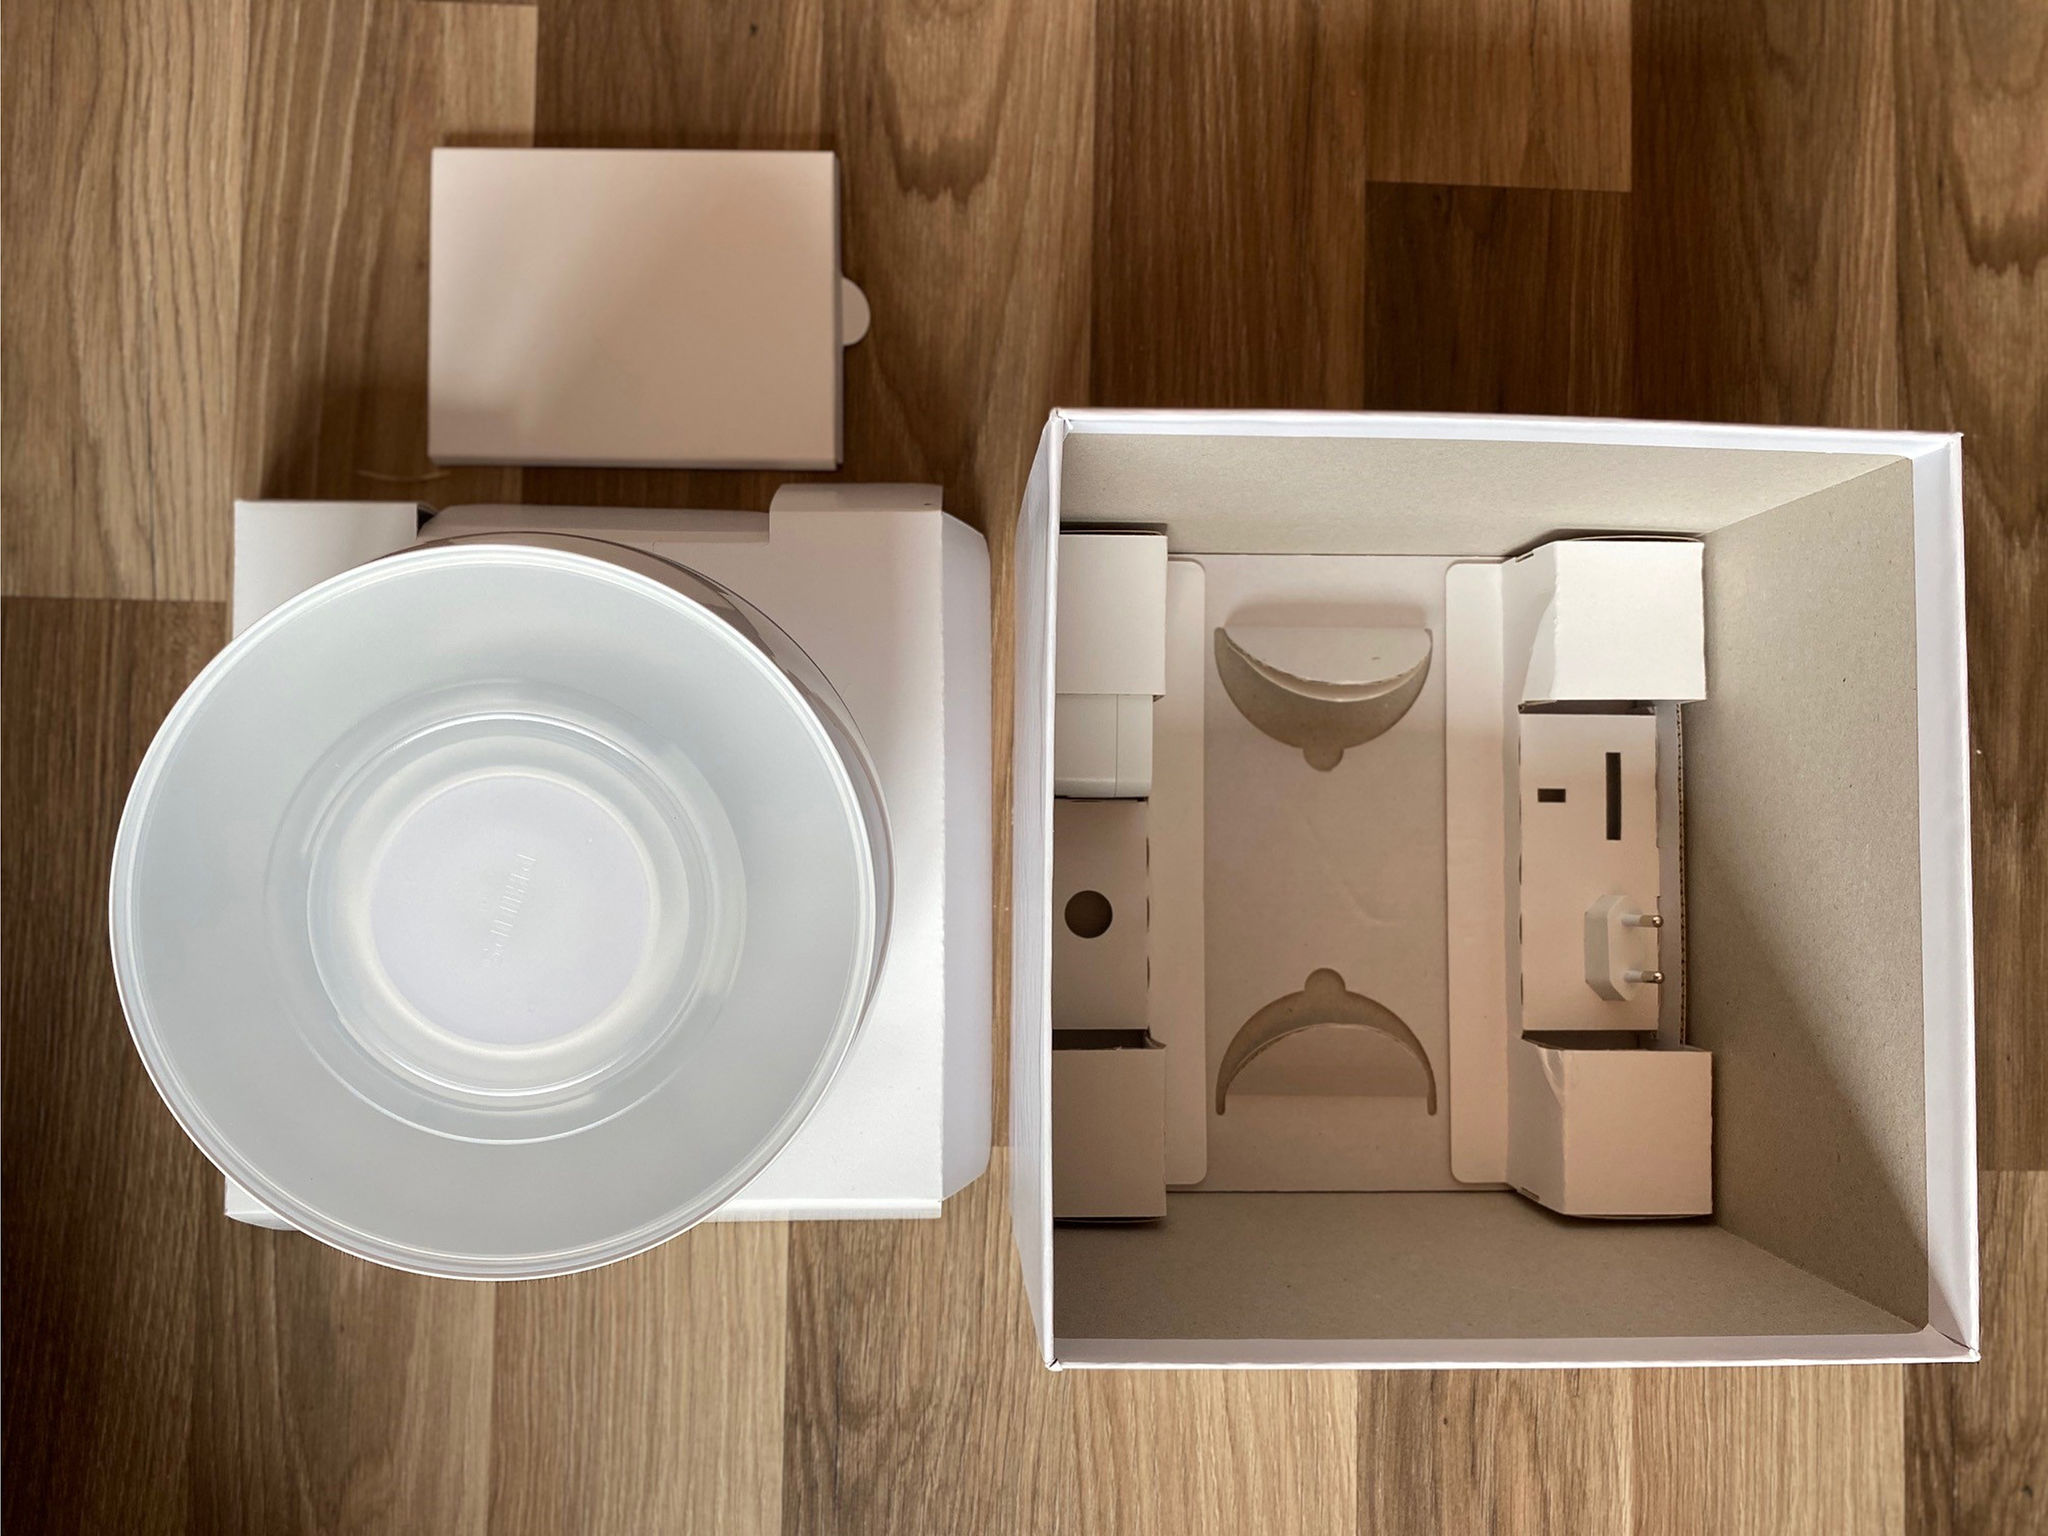 Philips Hue Iris Limited edition packaging